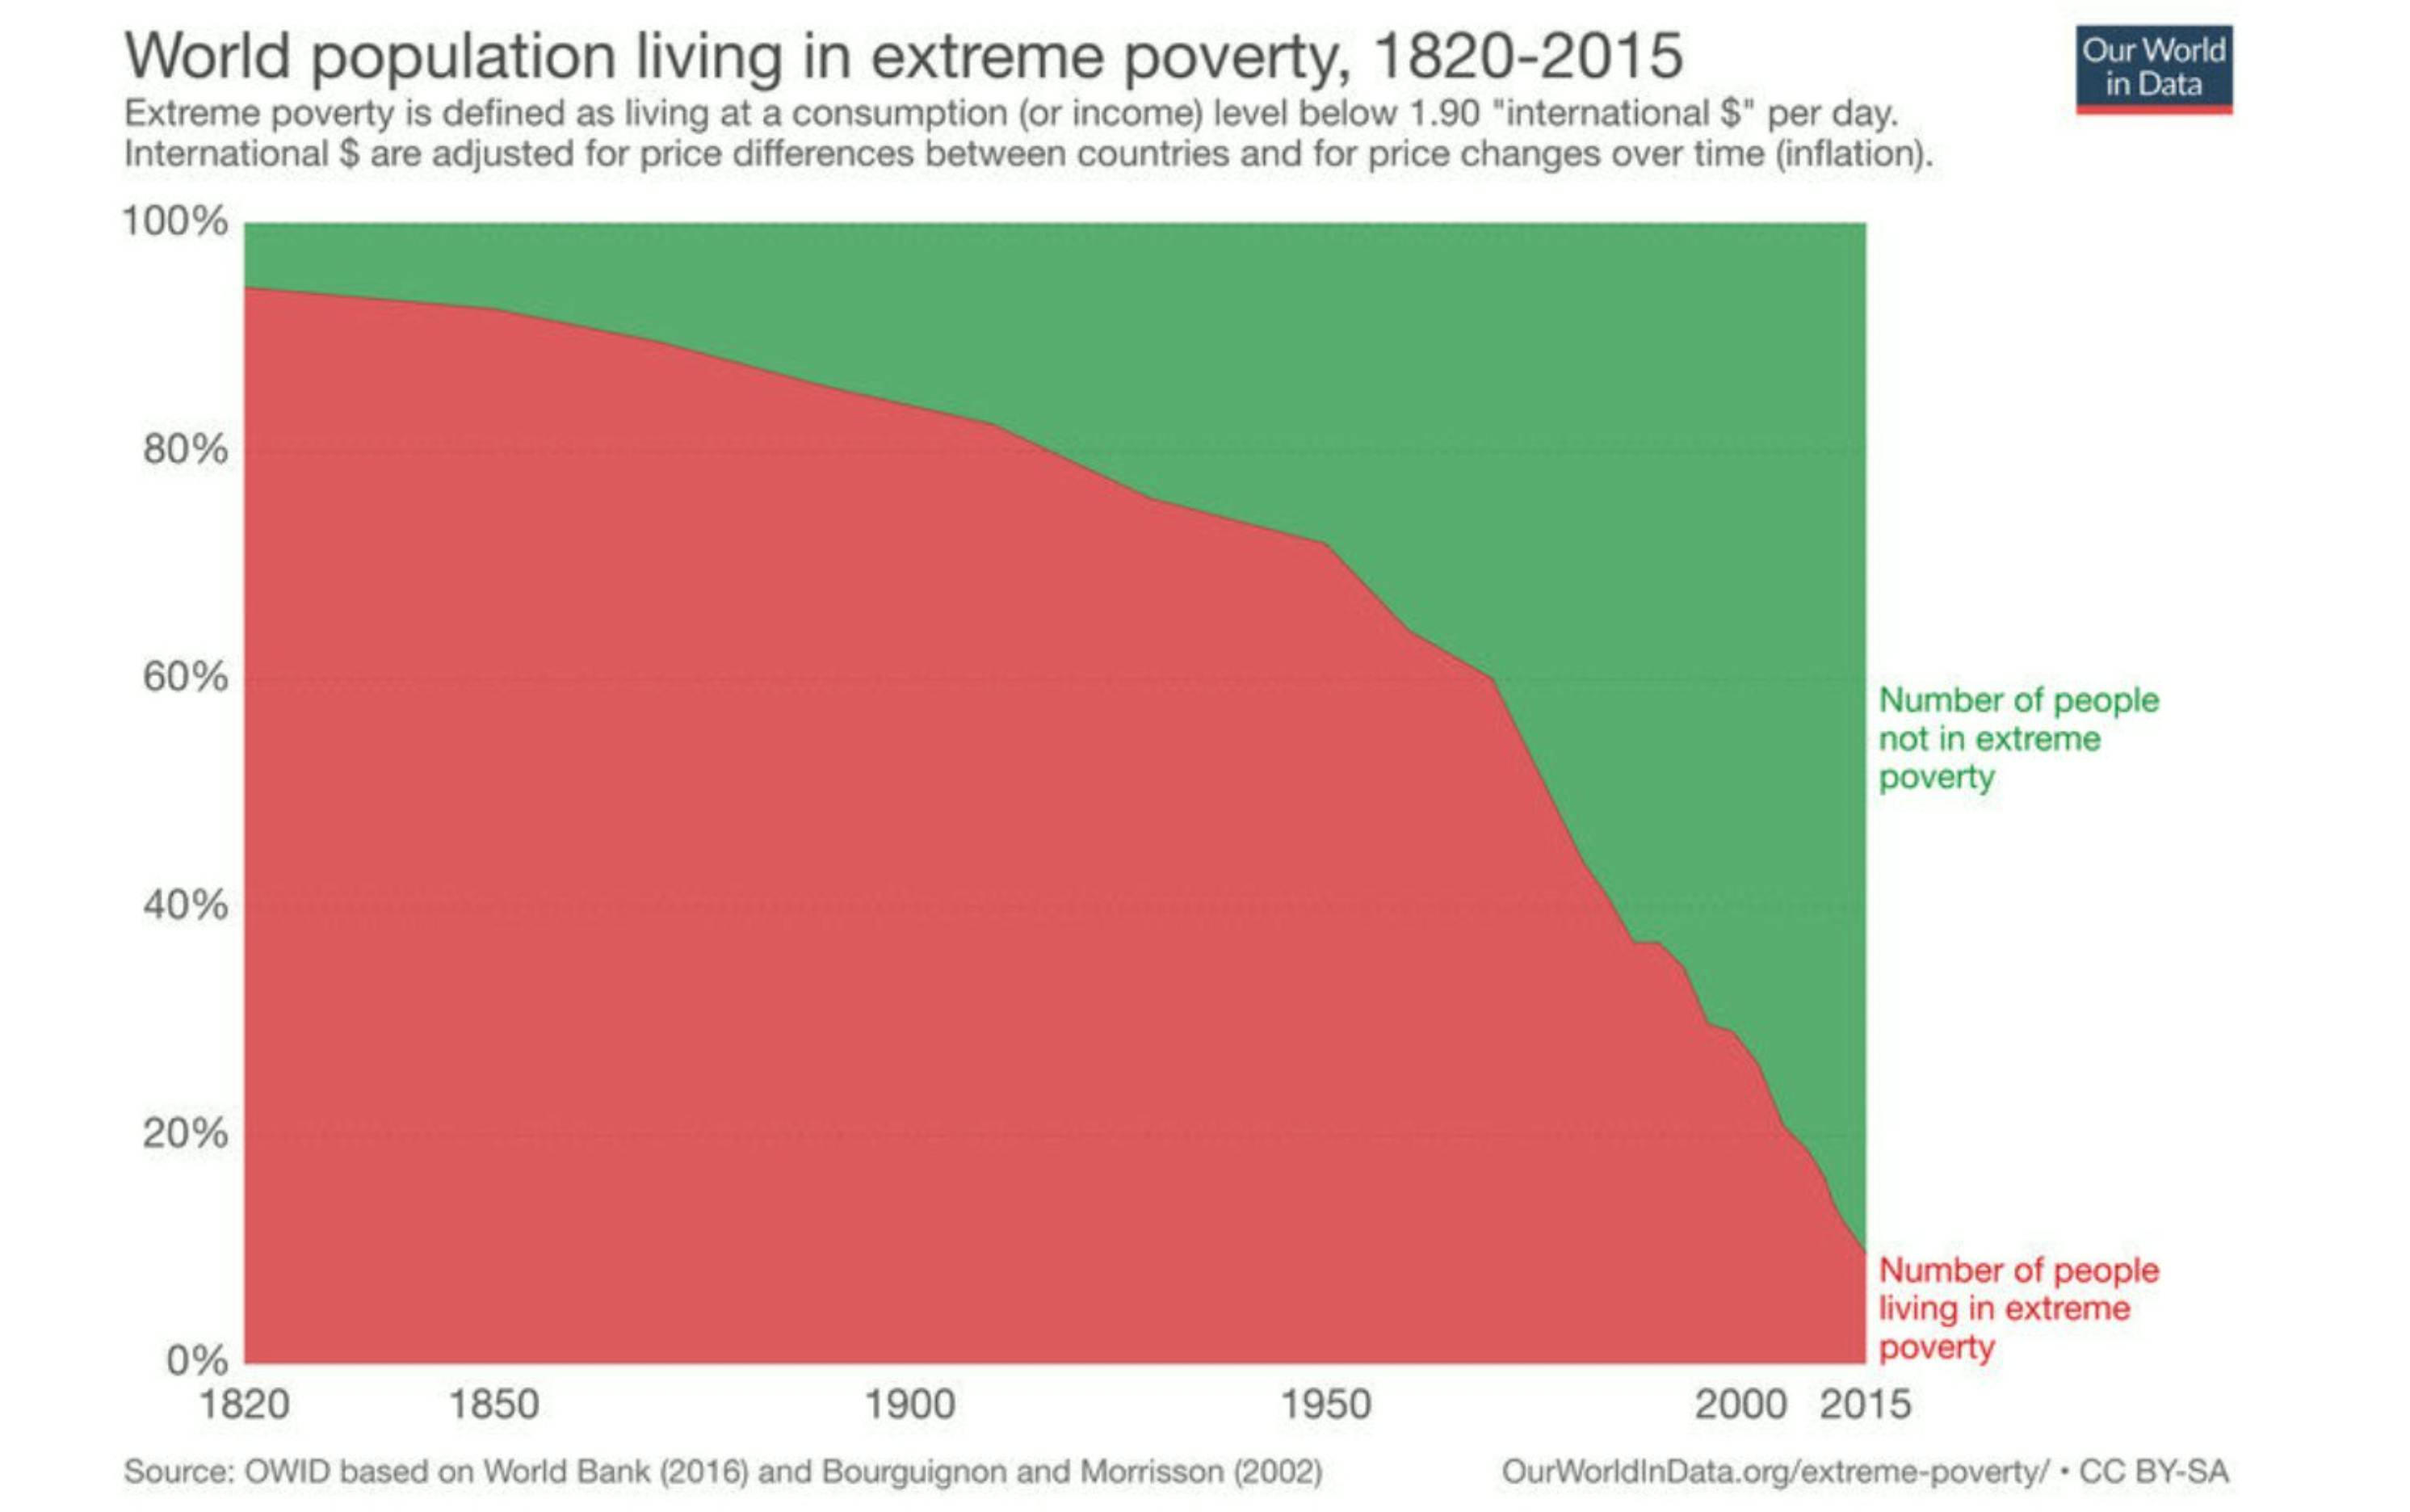 Area chart titled World population living in extreme poverty, 1820-2015. Red area representing the number of people living in extreme poverty shows a sharp decline from 1950 to 2015.